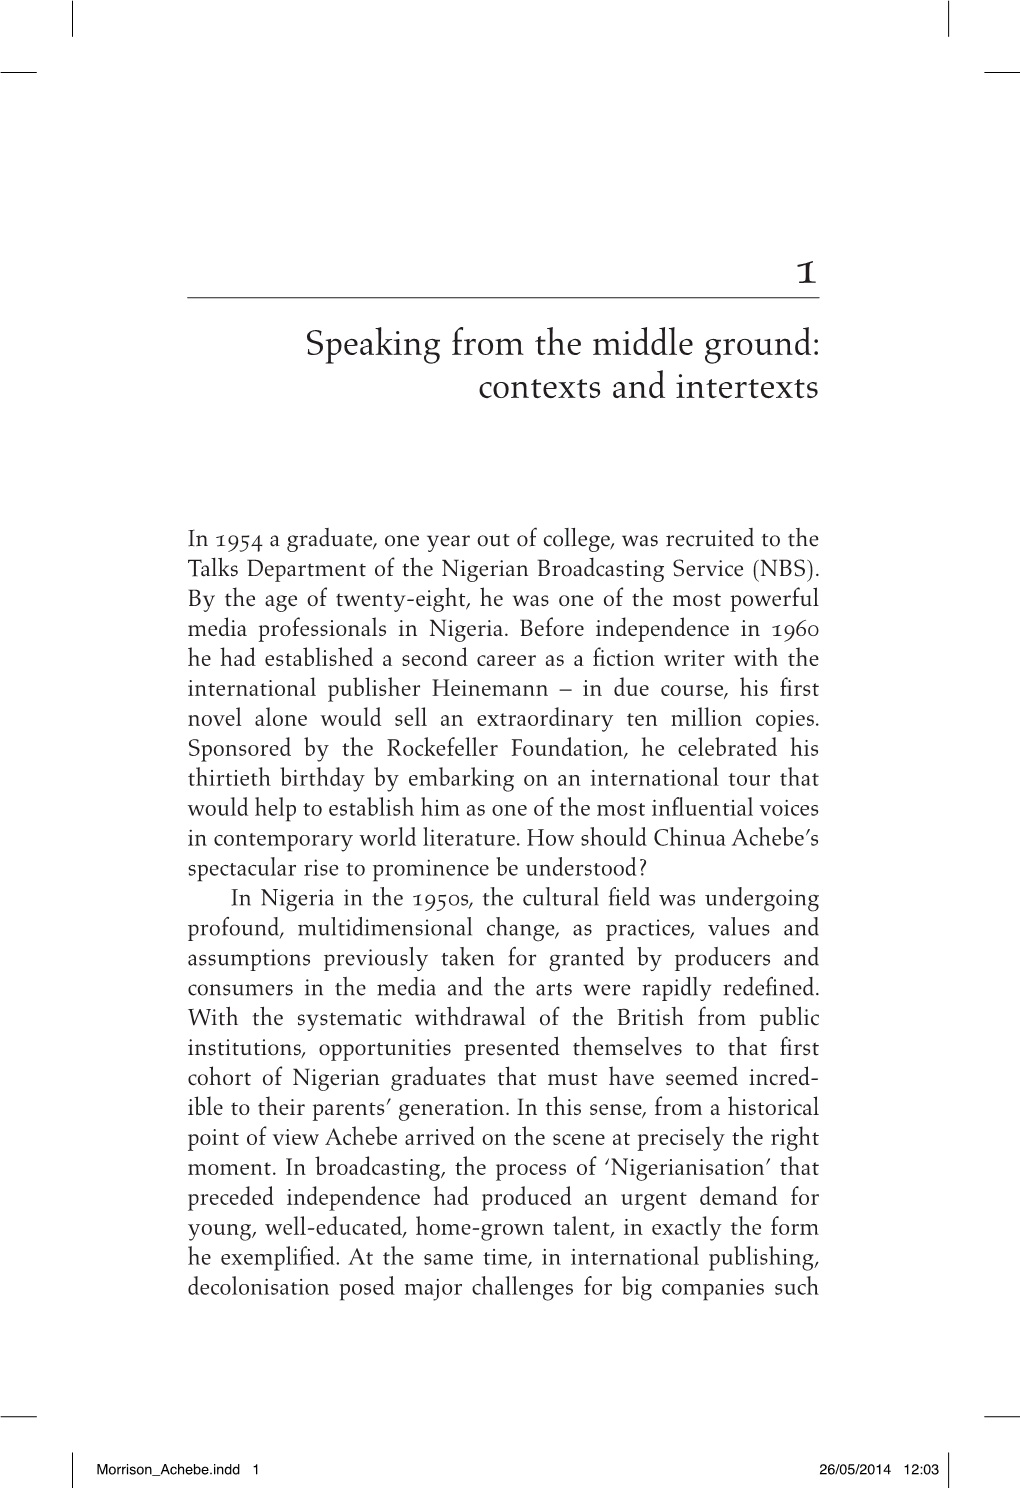 Speaking from the Middle Ground: Contexts and Intertexts